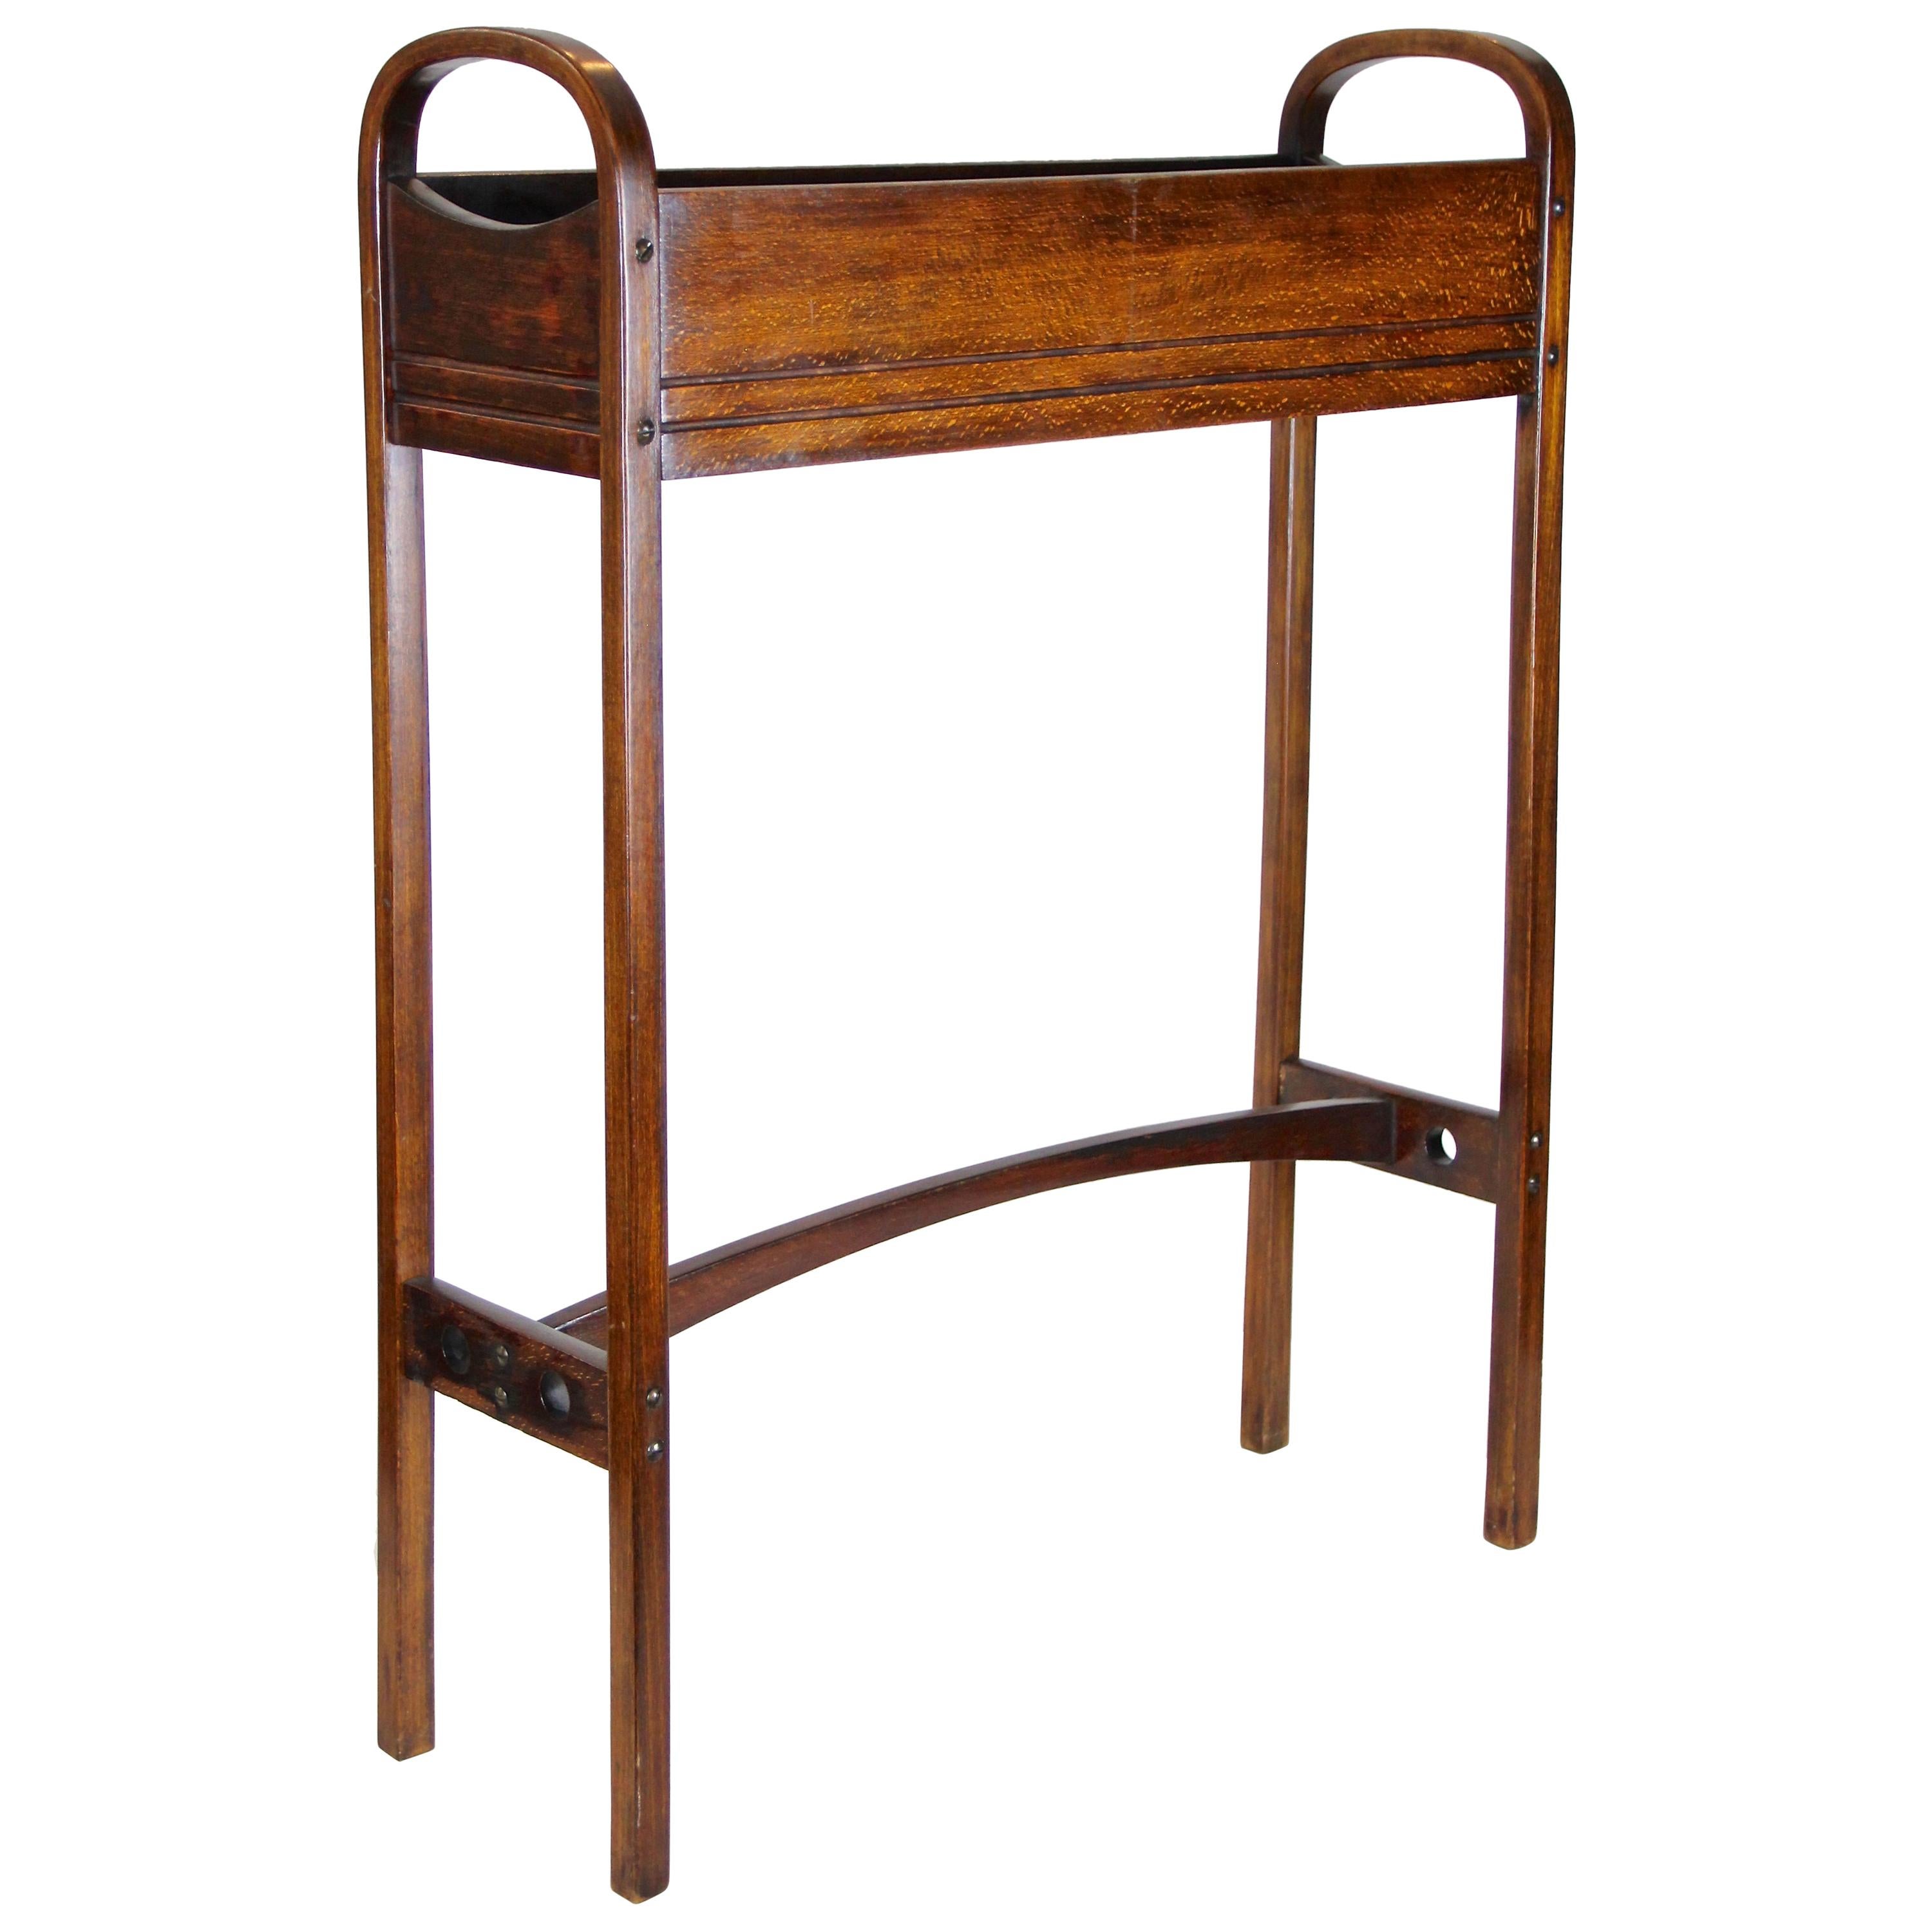 Bentwood Plant Stand or Flower Tub Mod. No. 1 by Thonet, Austria, circa 1915